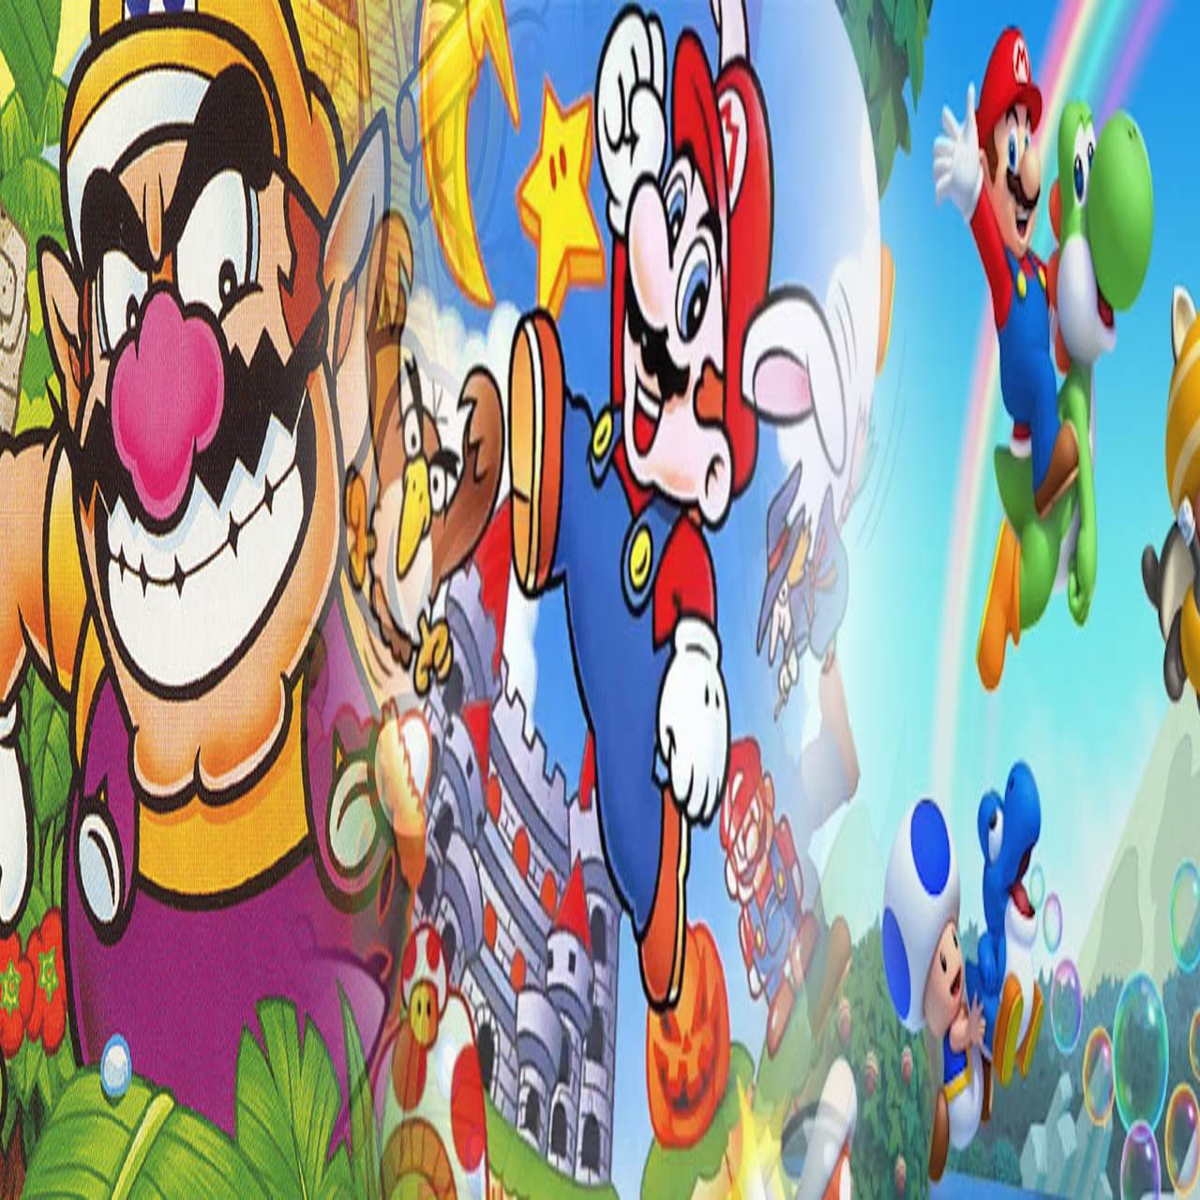 LIMITED EDITION SUPER MARIO ART POSTER WITH PRINTED SHIGERU